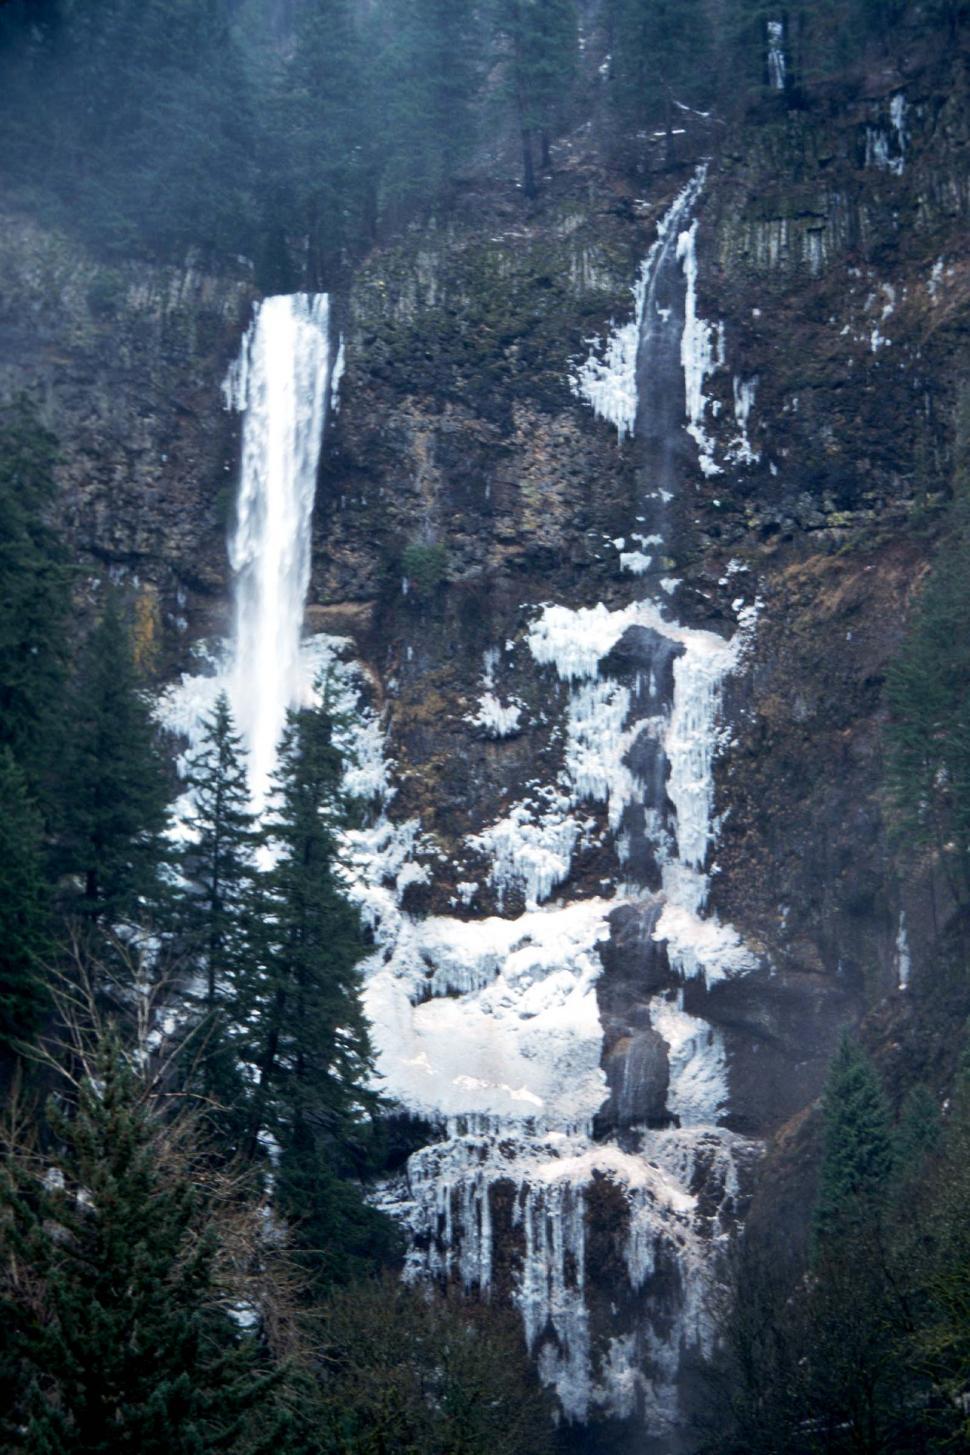 Free Image of Majestic Waterfall Surrounded by Snowy Trees 